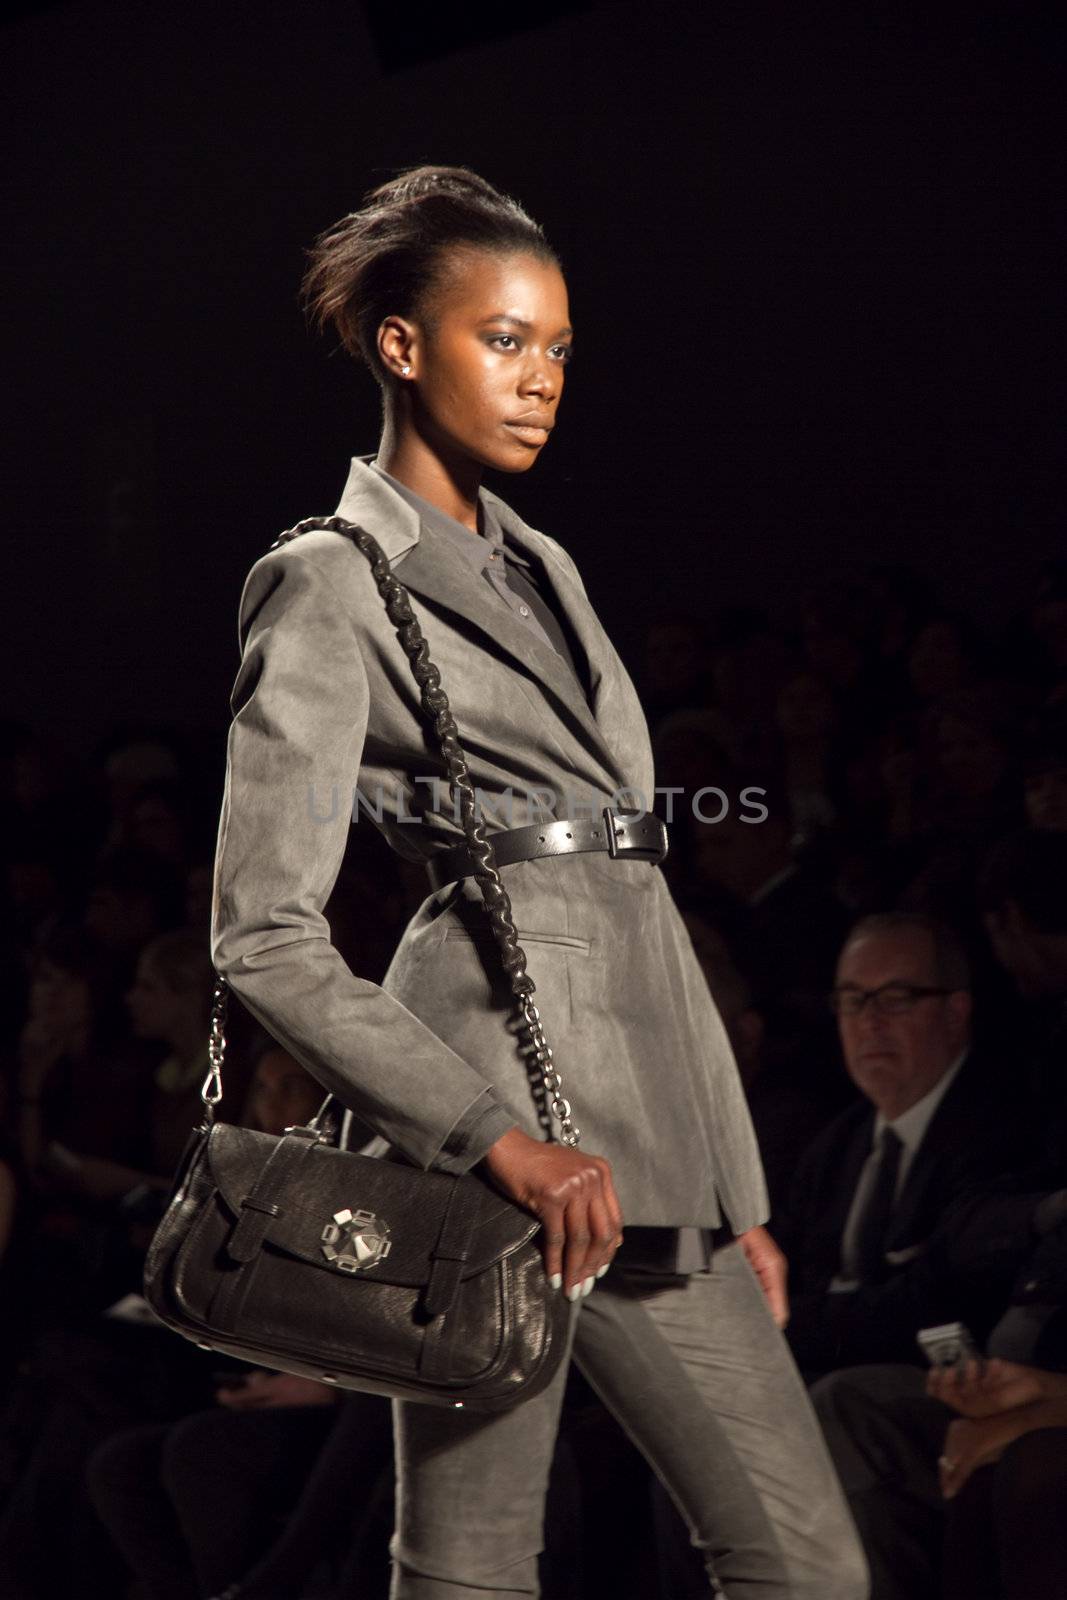 Nicole Miller Runway Fall 2011 Collection New York by photopro